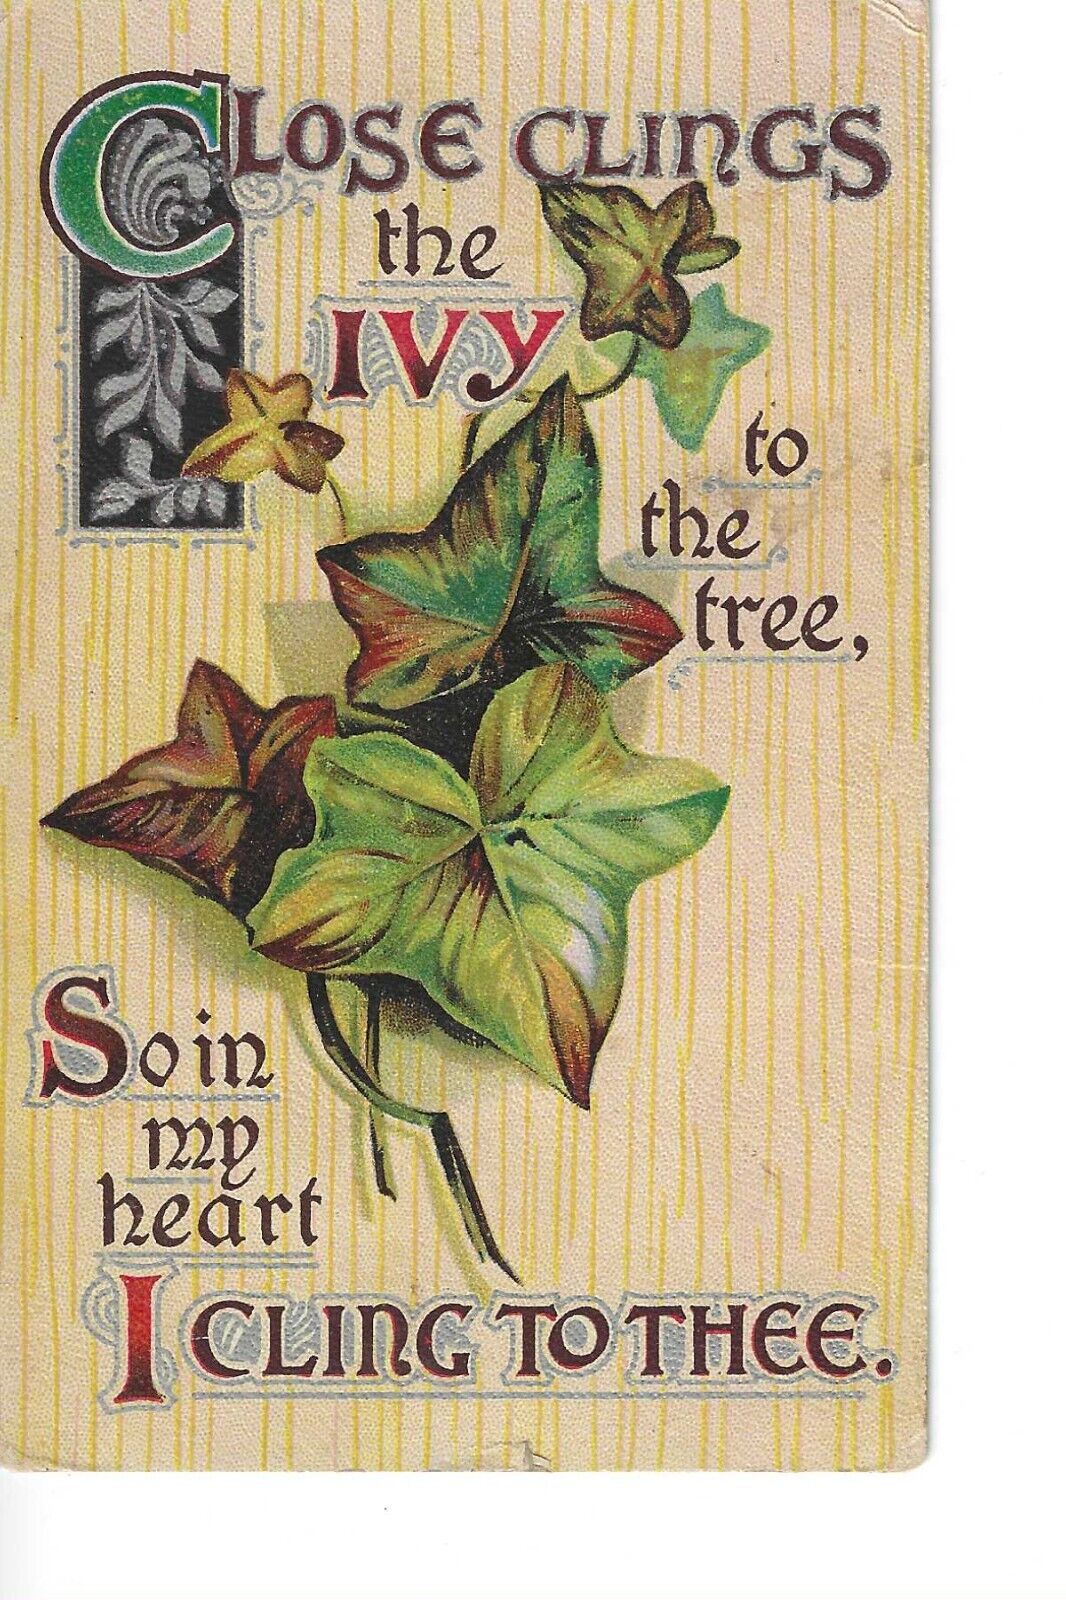 Vintage Postcard, Love~Close Clings The Ivy To The Tree~So I Cling To Thee